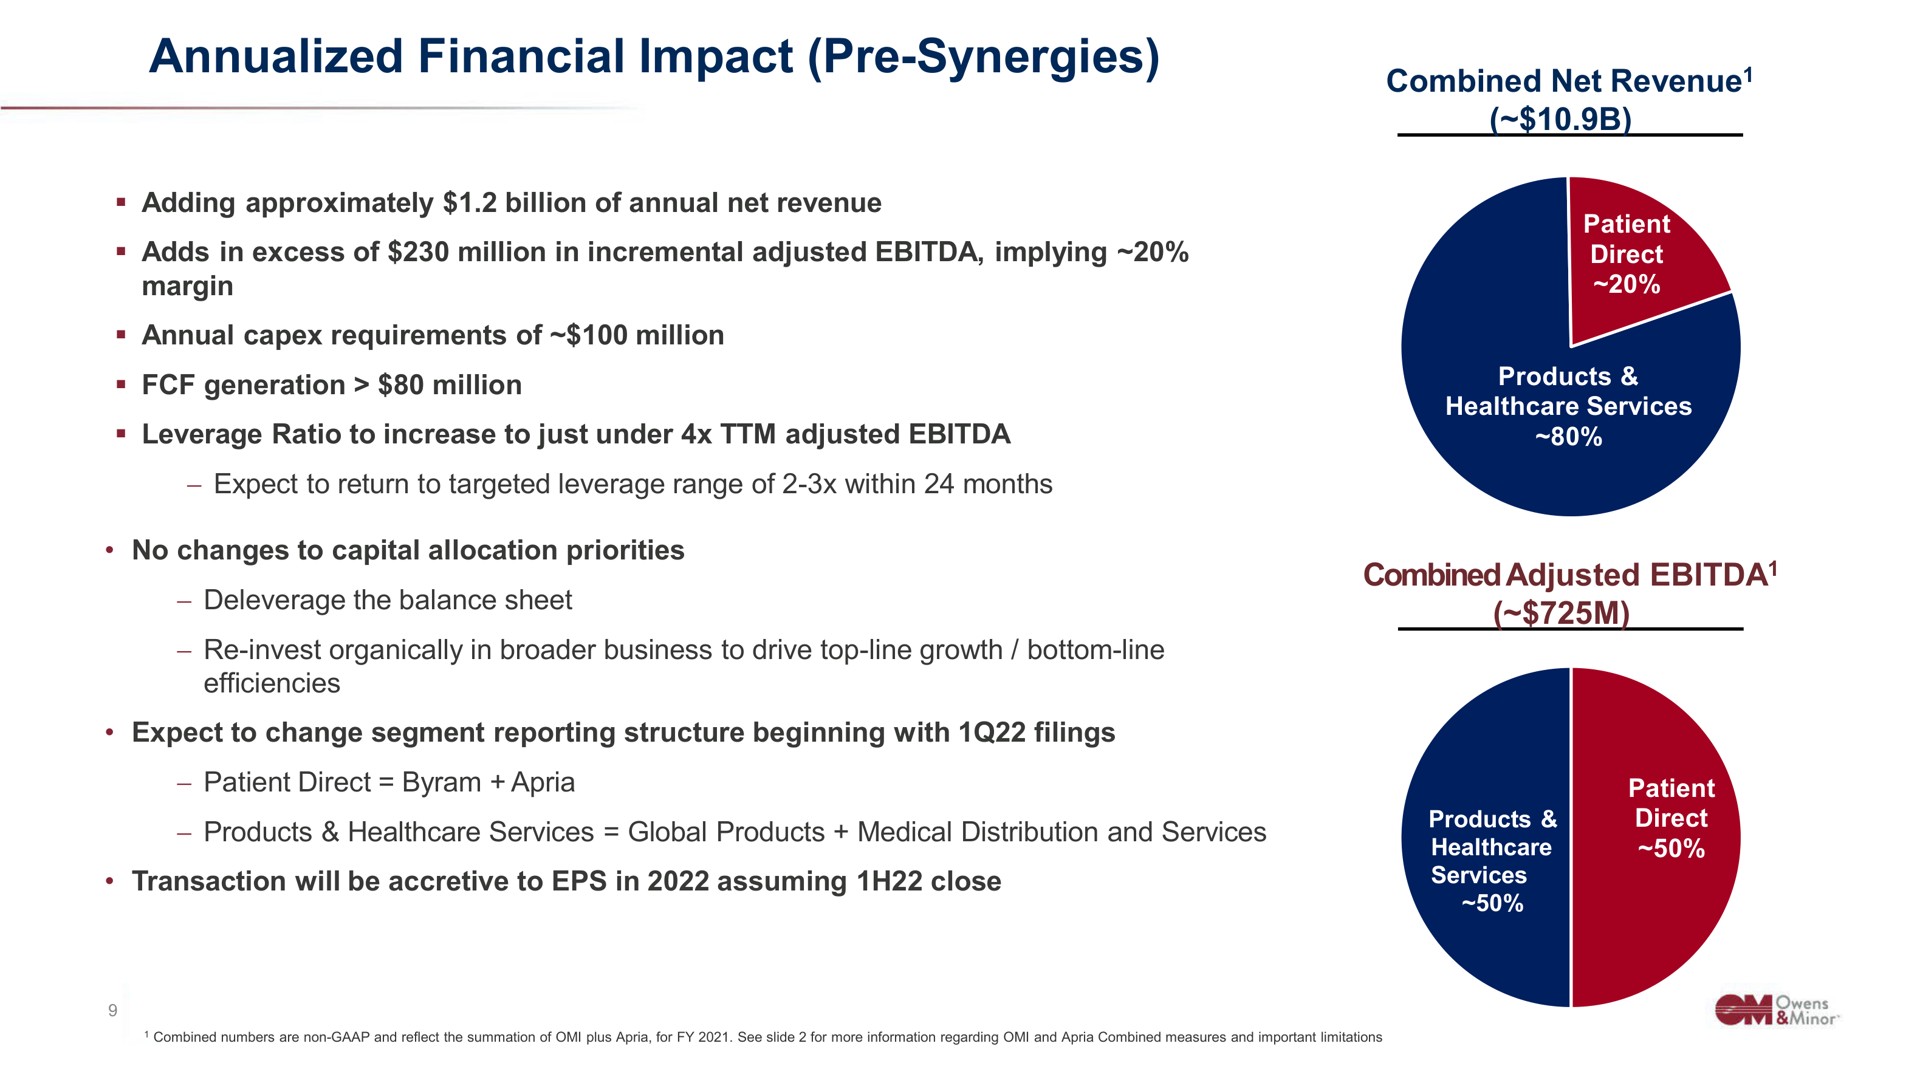 financial impact synergies | Owens&Minor